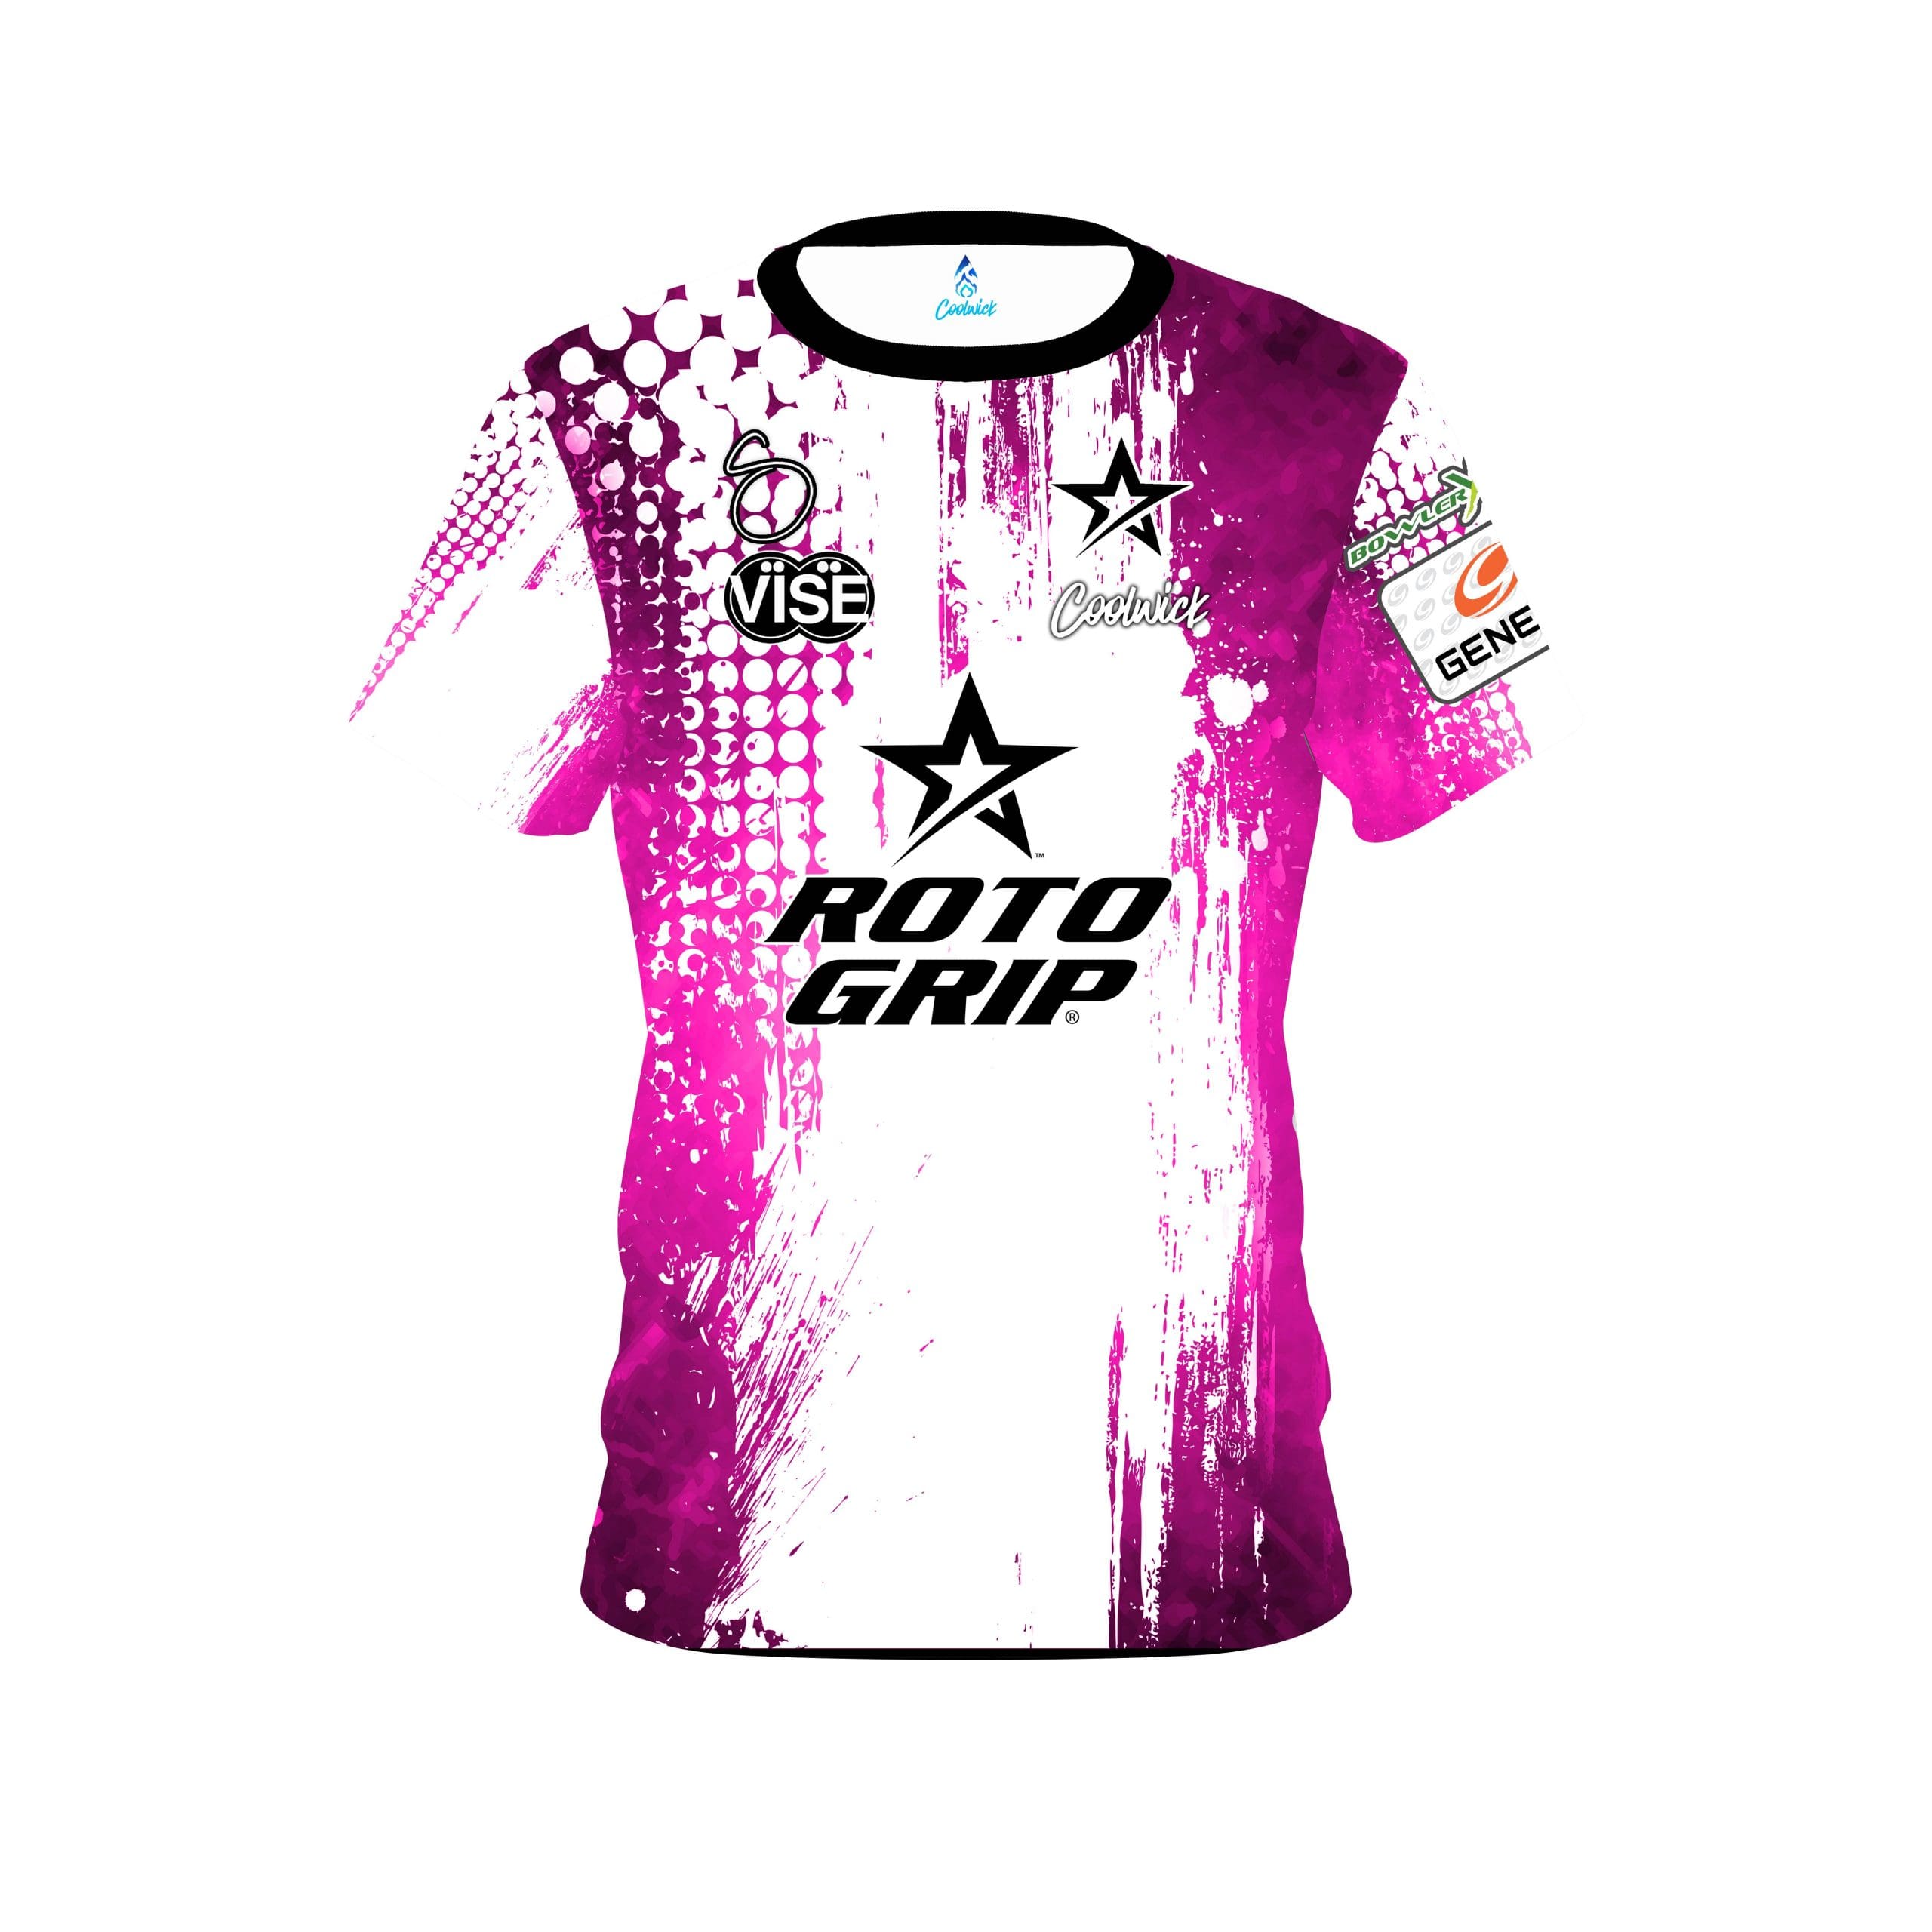 900 Global Cherry Blossom CoolWick Bowling Jersey - Coolwick Bowling Apparel